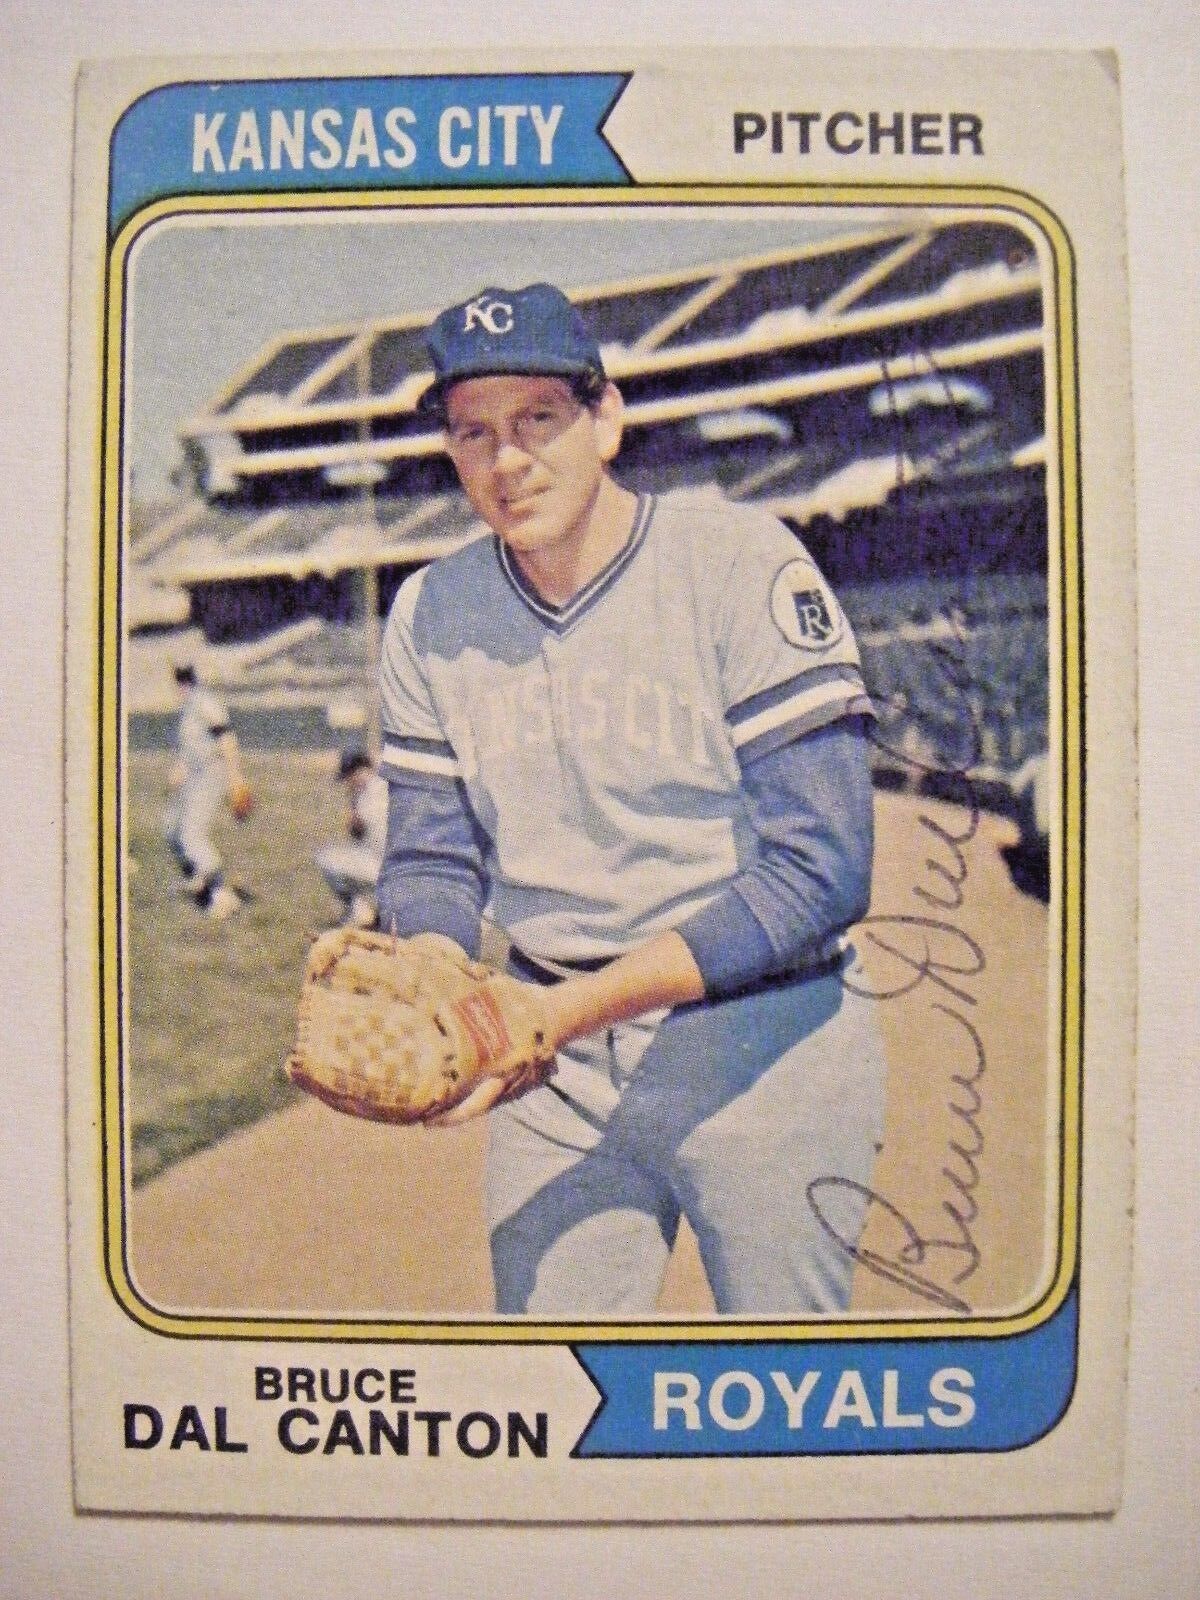 BRUCE DAL CANTON signed ROYALS 1974 Topps baseball card AUTO Autographed BRAVES